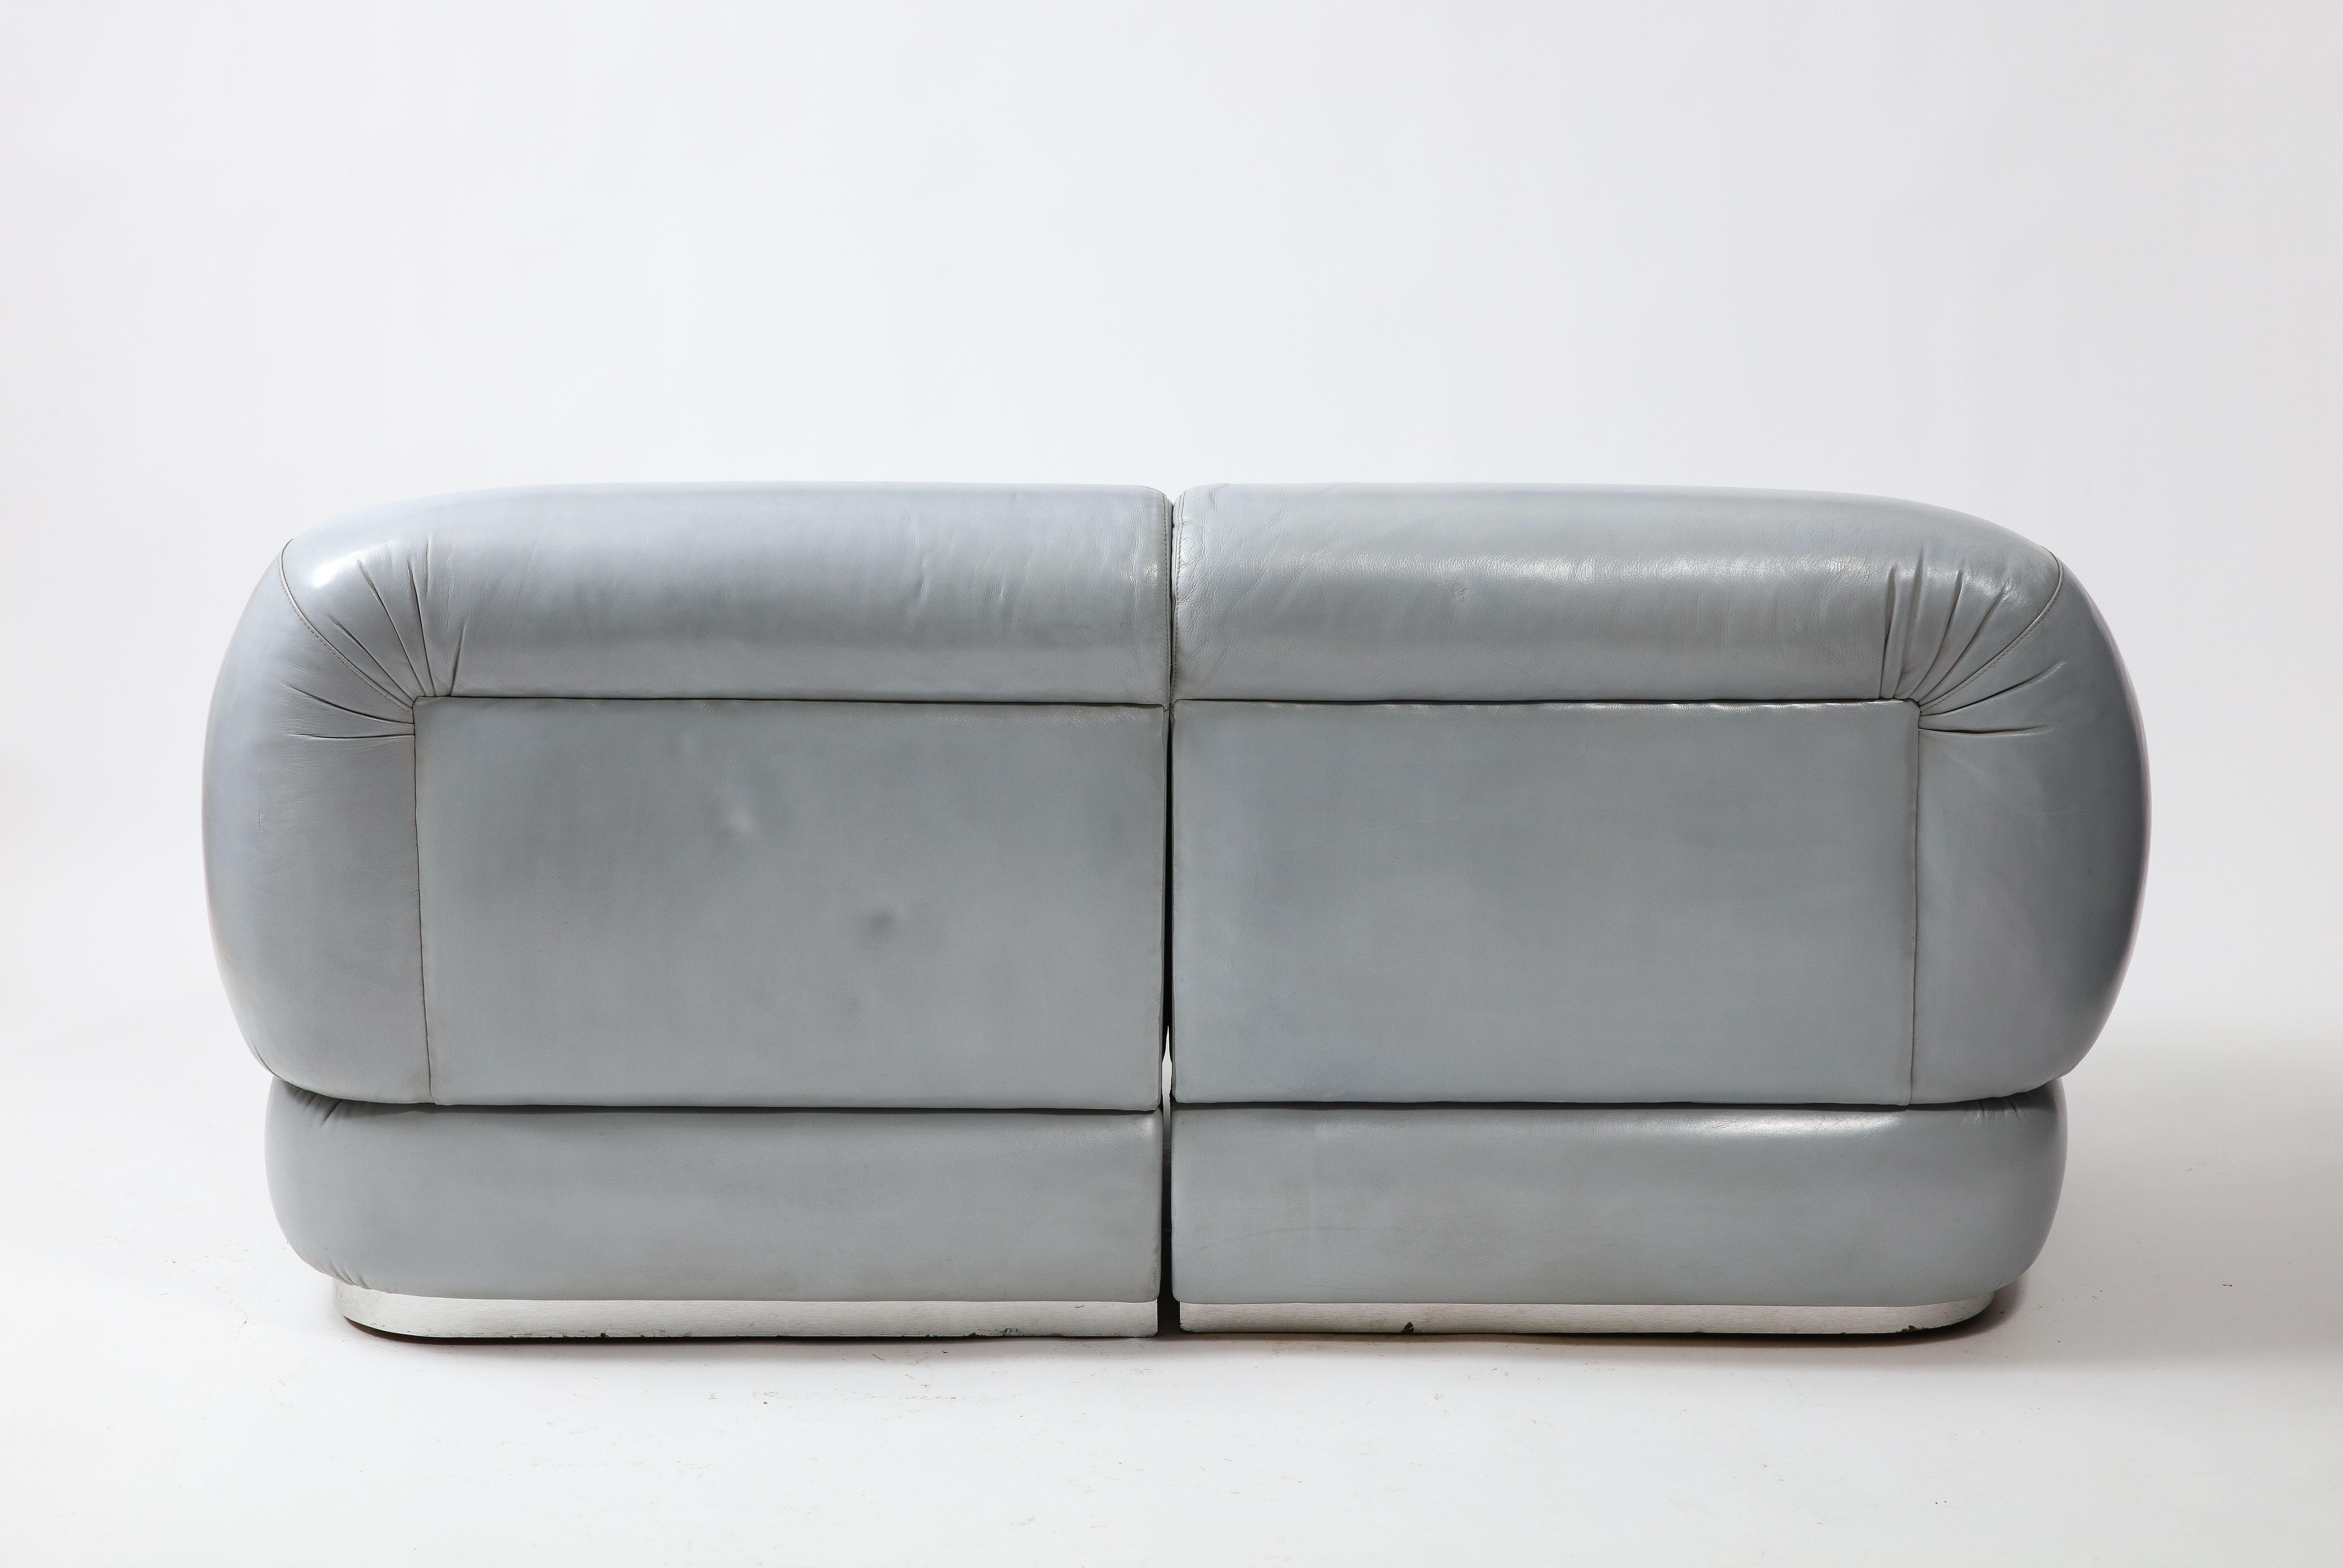 Cantu Grey Leather Settee, Italy 1970's For Sale 4